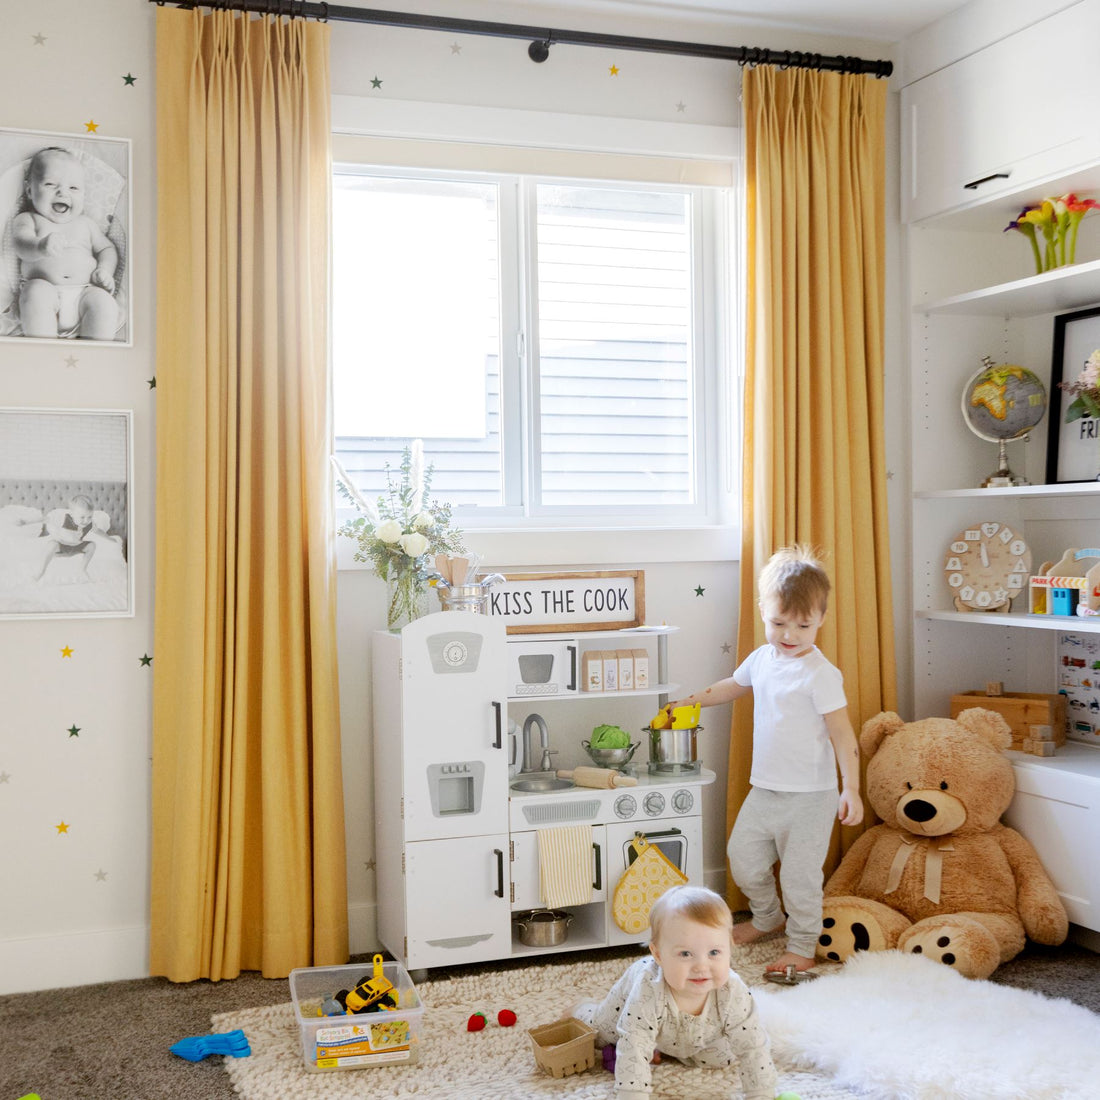 Wall Decals for Kids: Making Bedrooms Playful and Whimsical